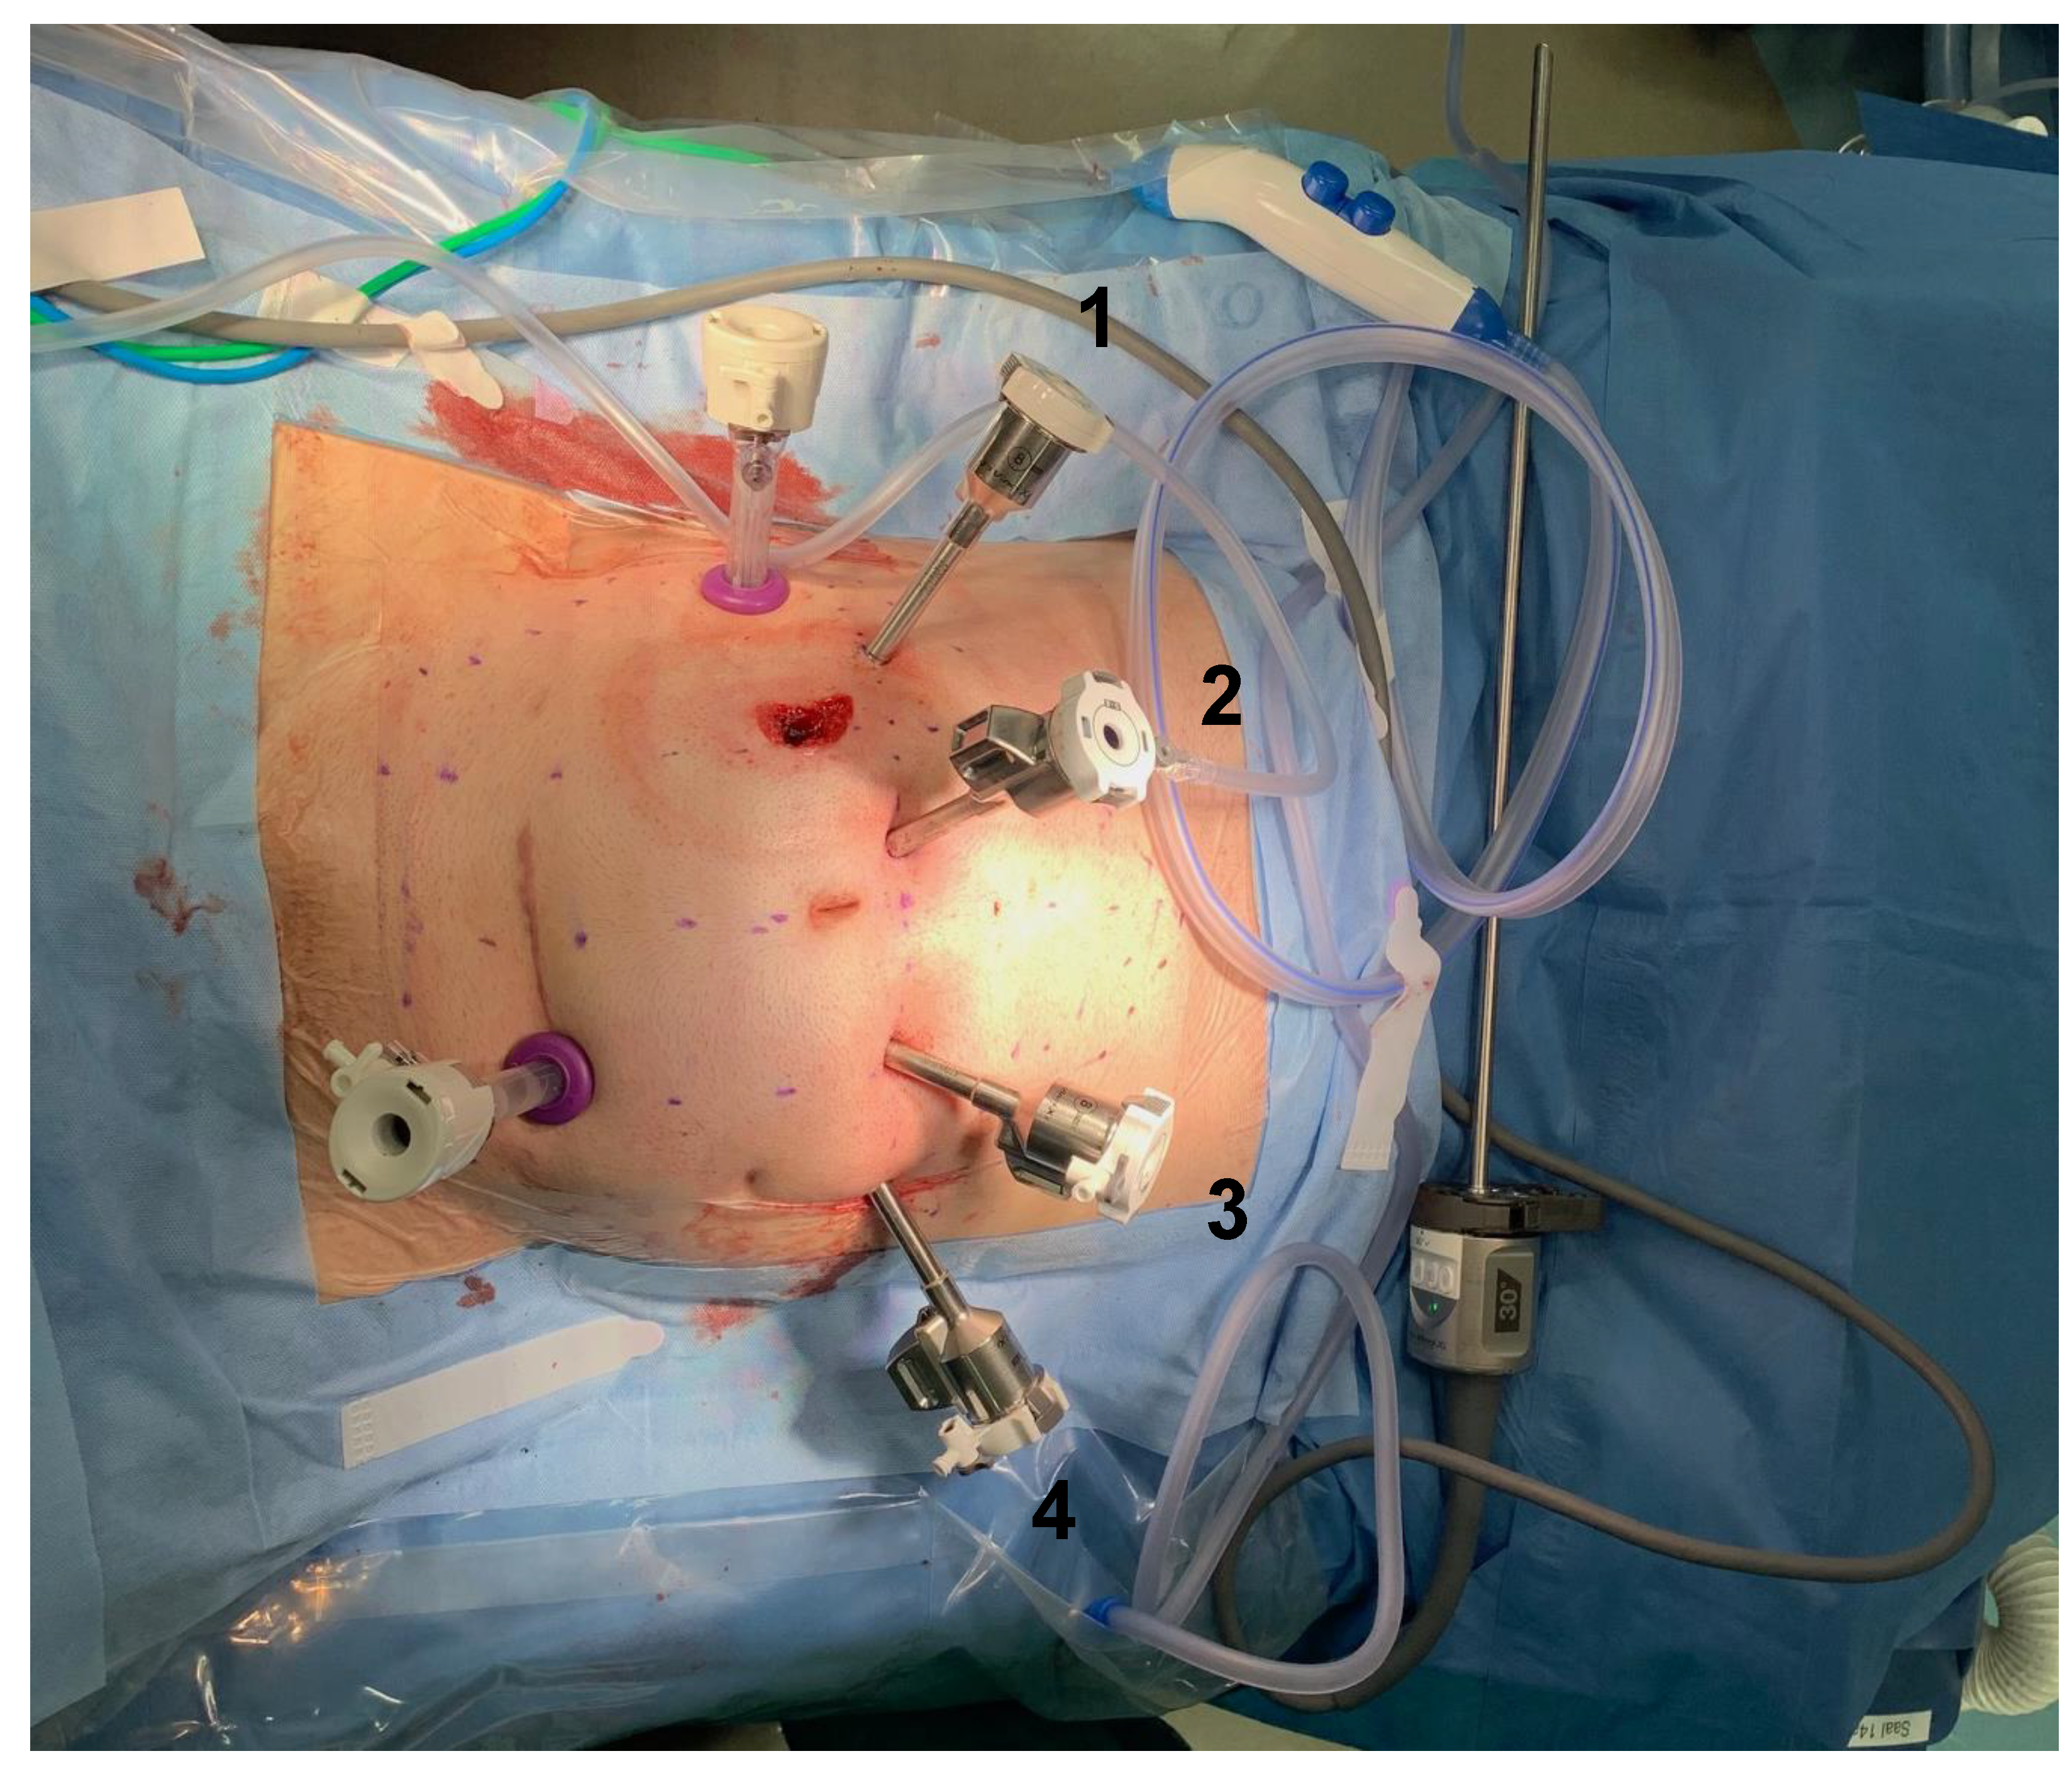 JCM Free Full-Text Robotic-Assisted versus Laparoscopic Proctectomy with Ileal Pouch-Anal Anastomosis for Ulcerative Colitis An Analysis of Clinical and Financial Outcomes from a Tertiary Referral Center